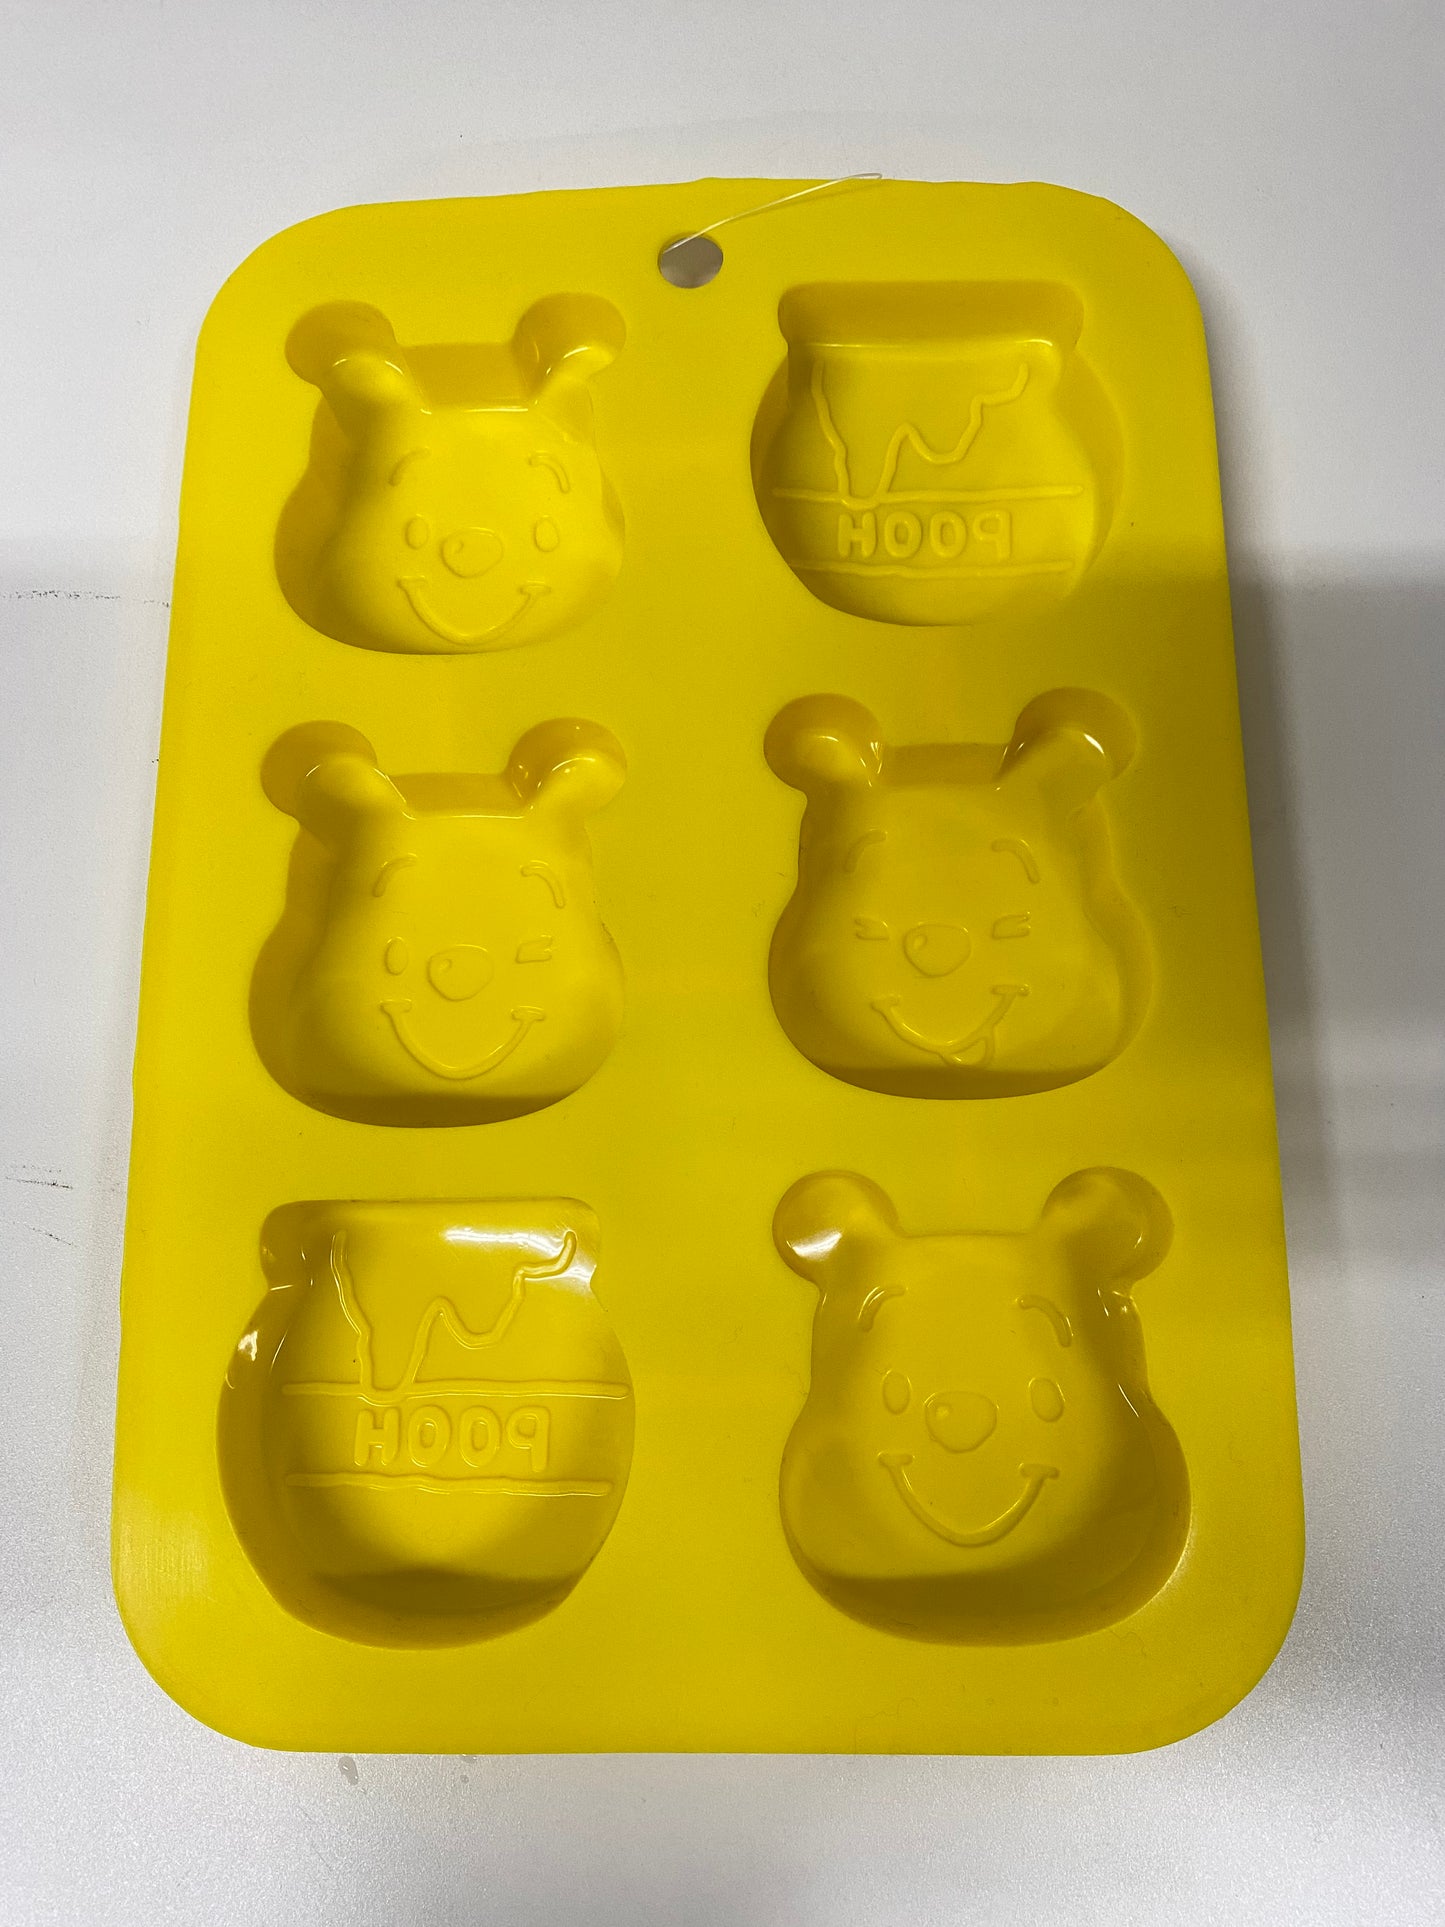 Japan Disney Winnie The Pooh with Honey Silicone Petite Cake Chocolate Ice Jelly Candle Mold